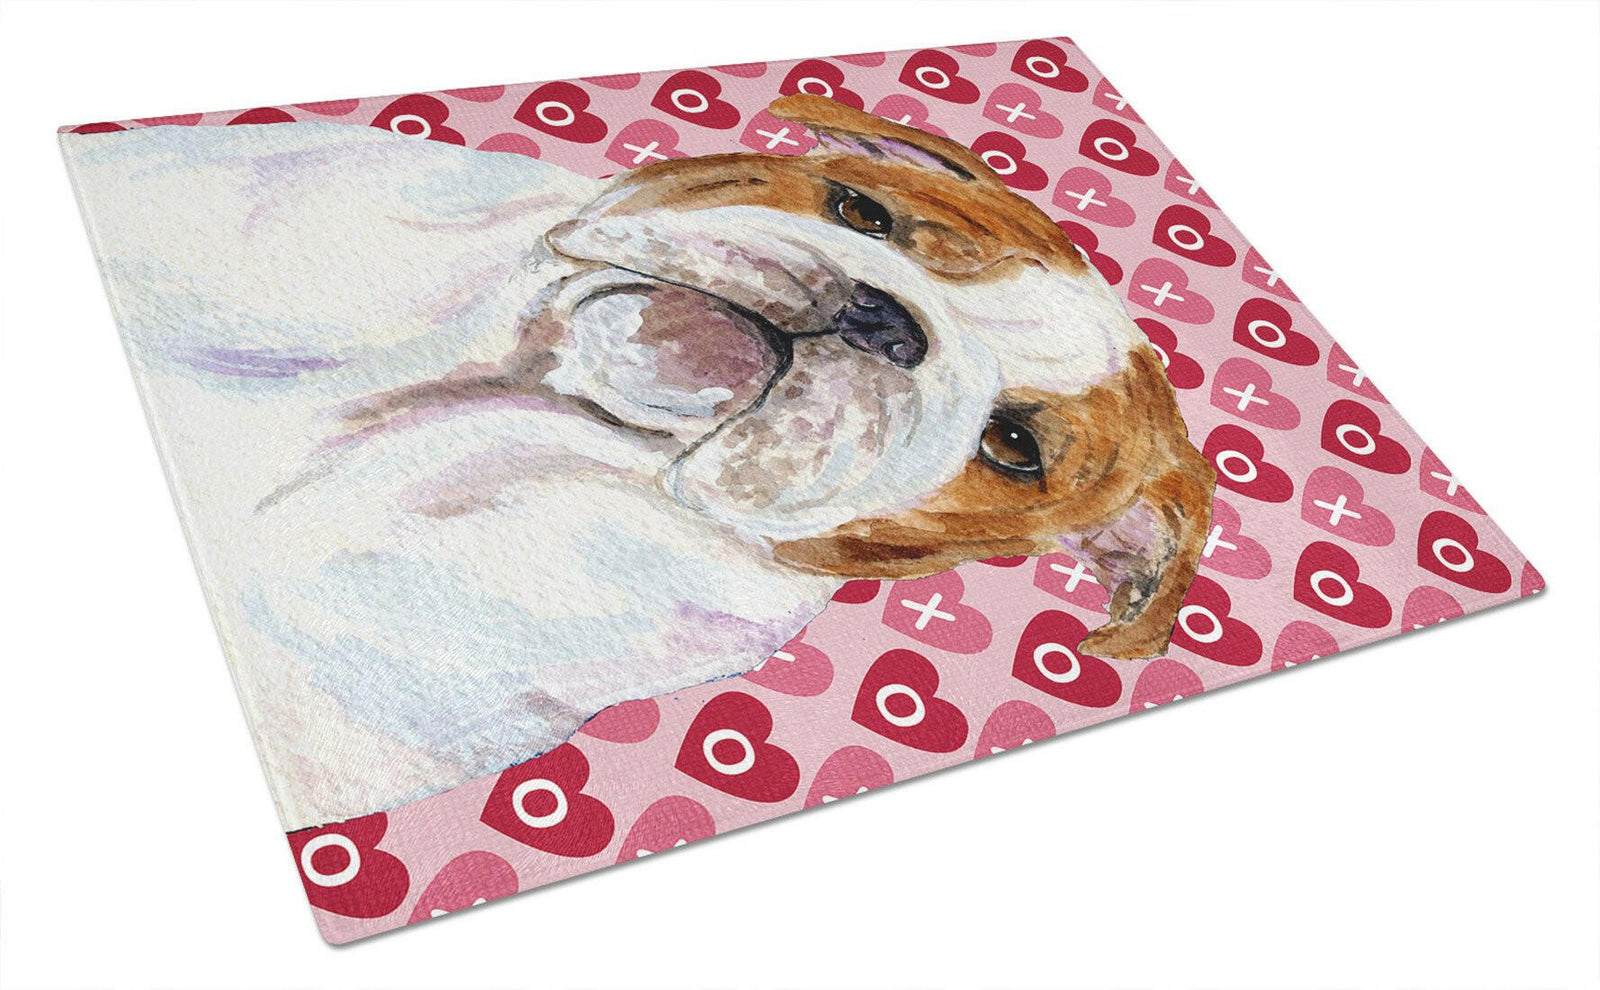 Bulldog English Hearts Love and Valentine's Day Glass Cutting Board Large by Caroline's Treasures